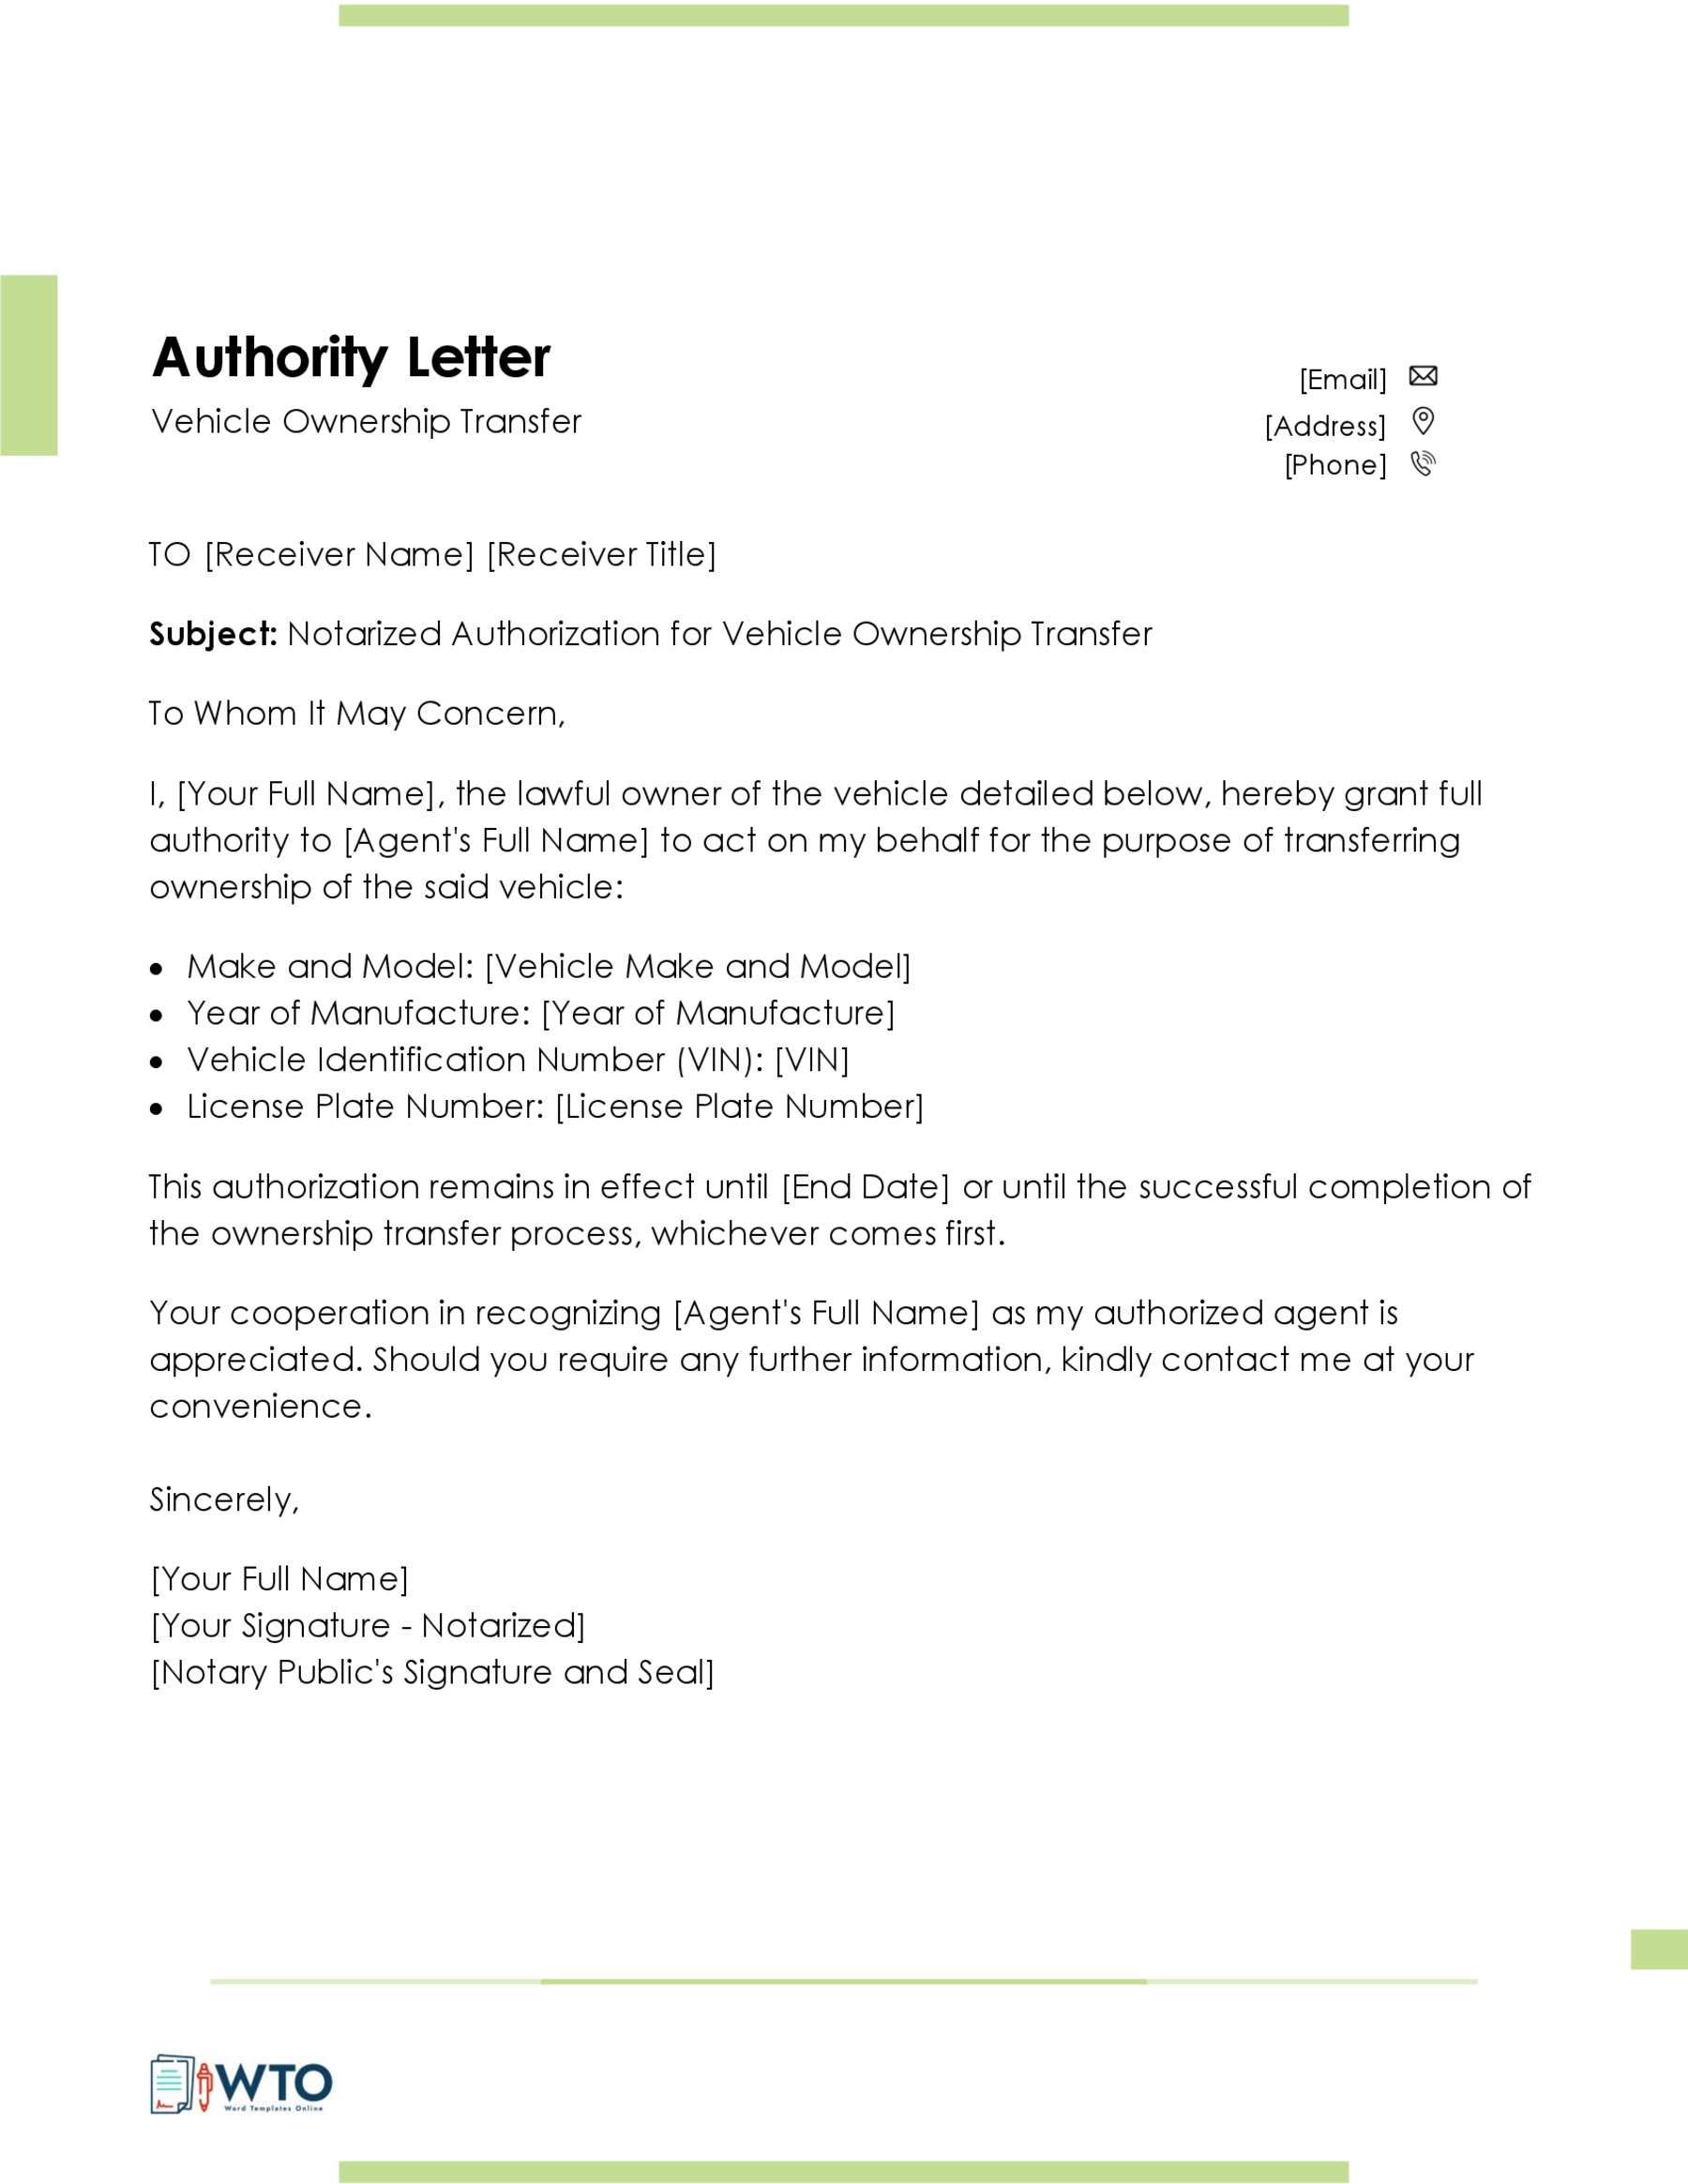 Authorization Letter Transfer Vehicle Ownership Letter Template-Ms Word Format